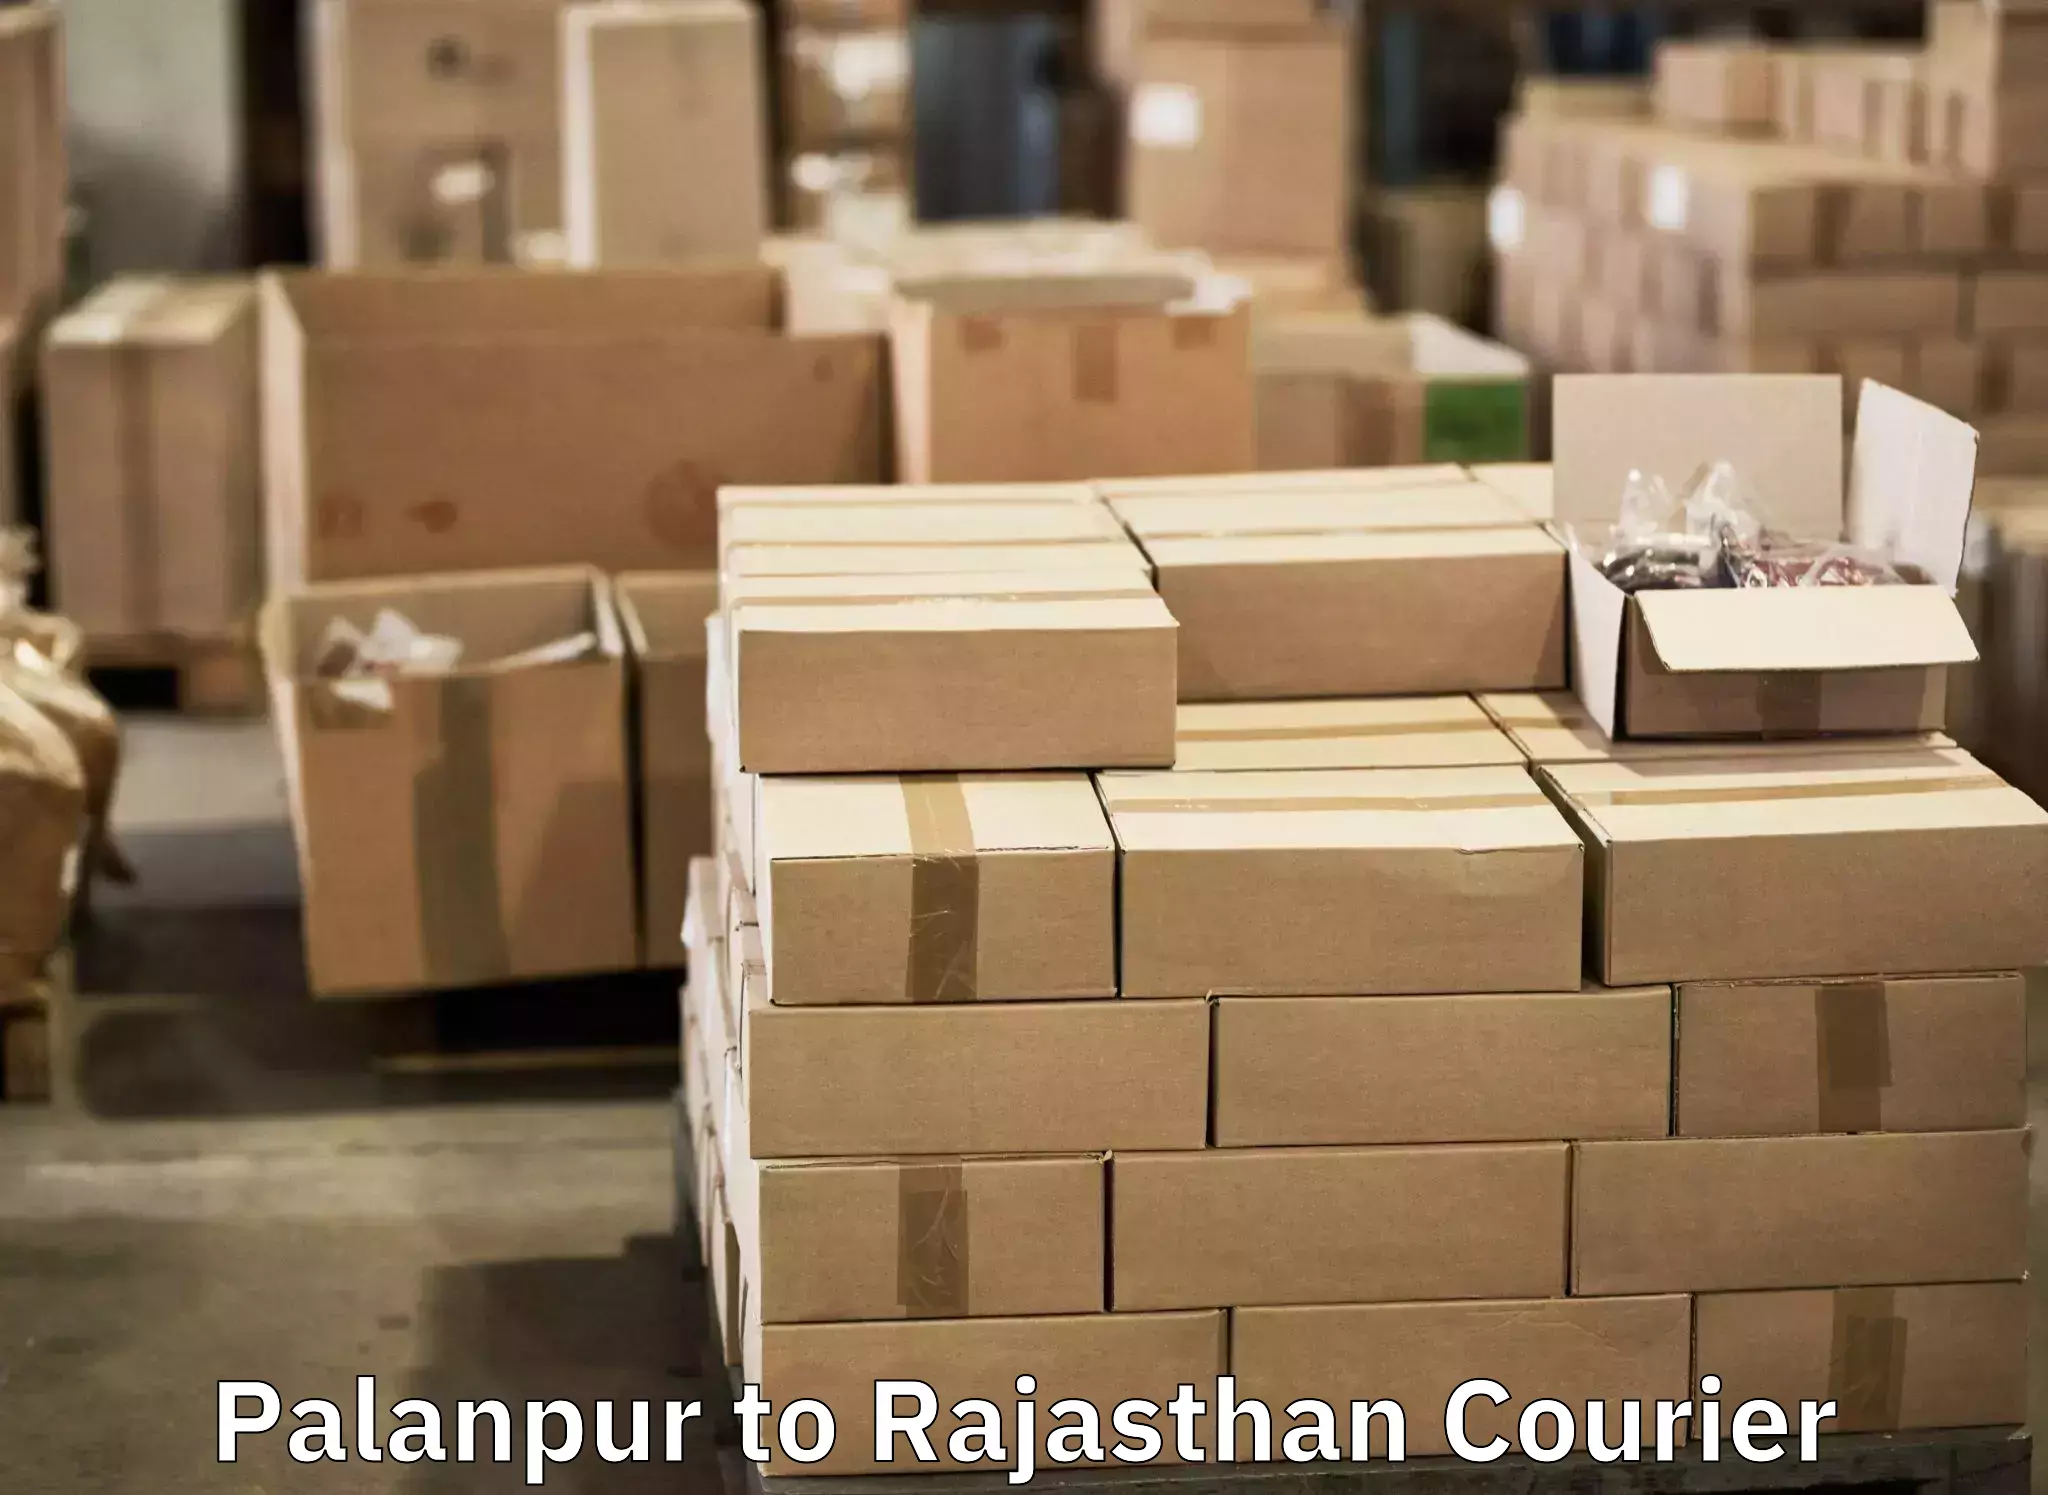 Baggage transport network Palanpur to Udaipur